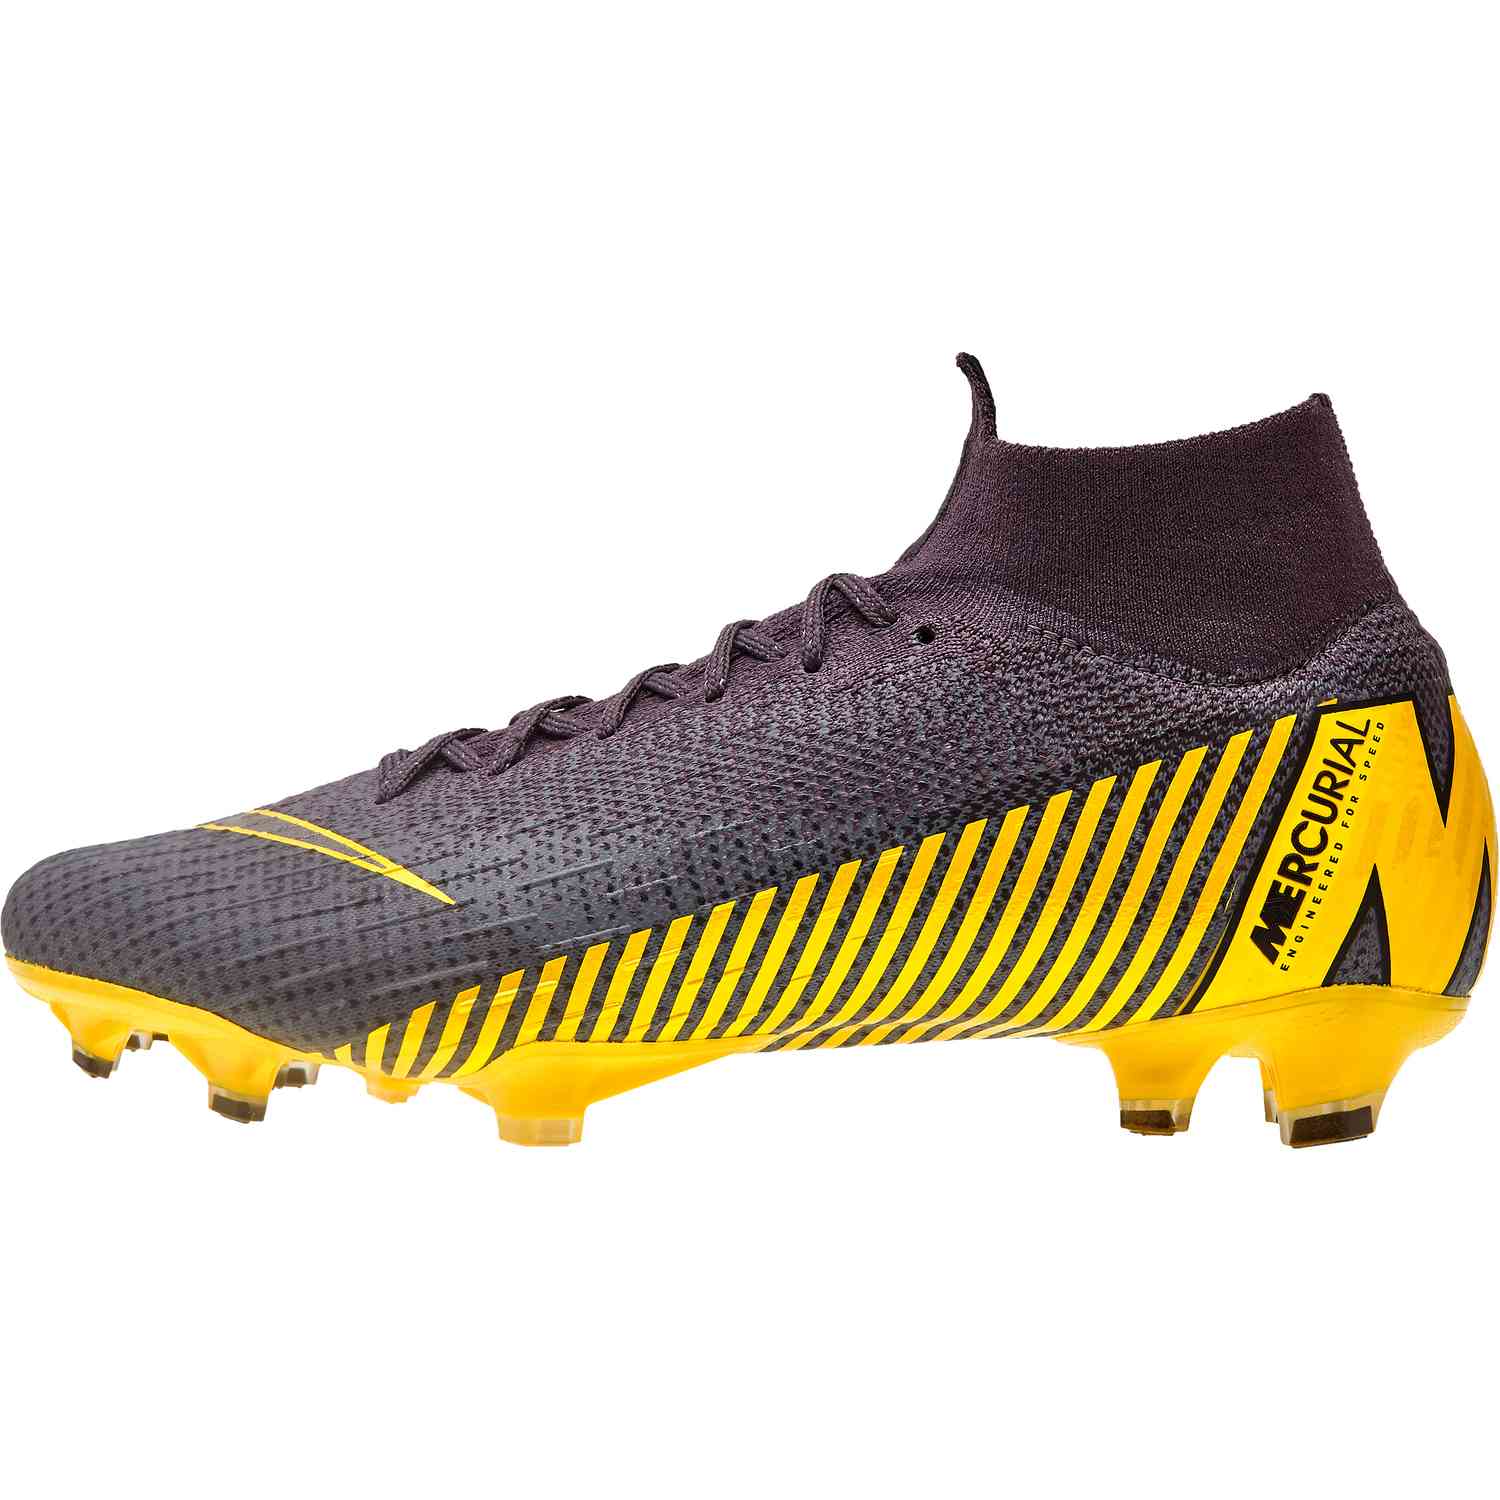 mercurial engineered for speed